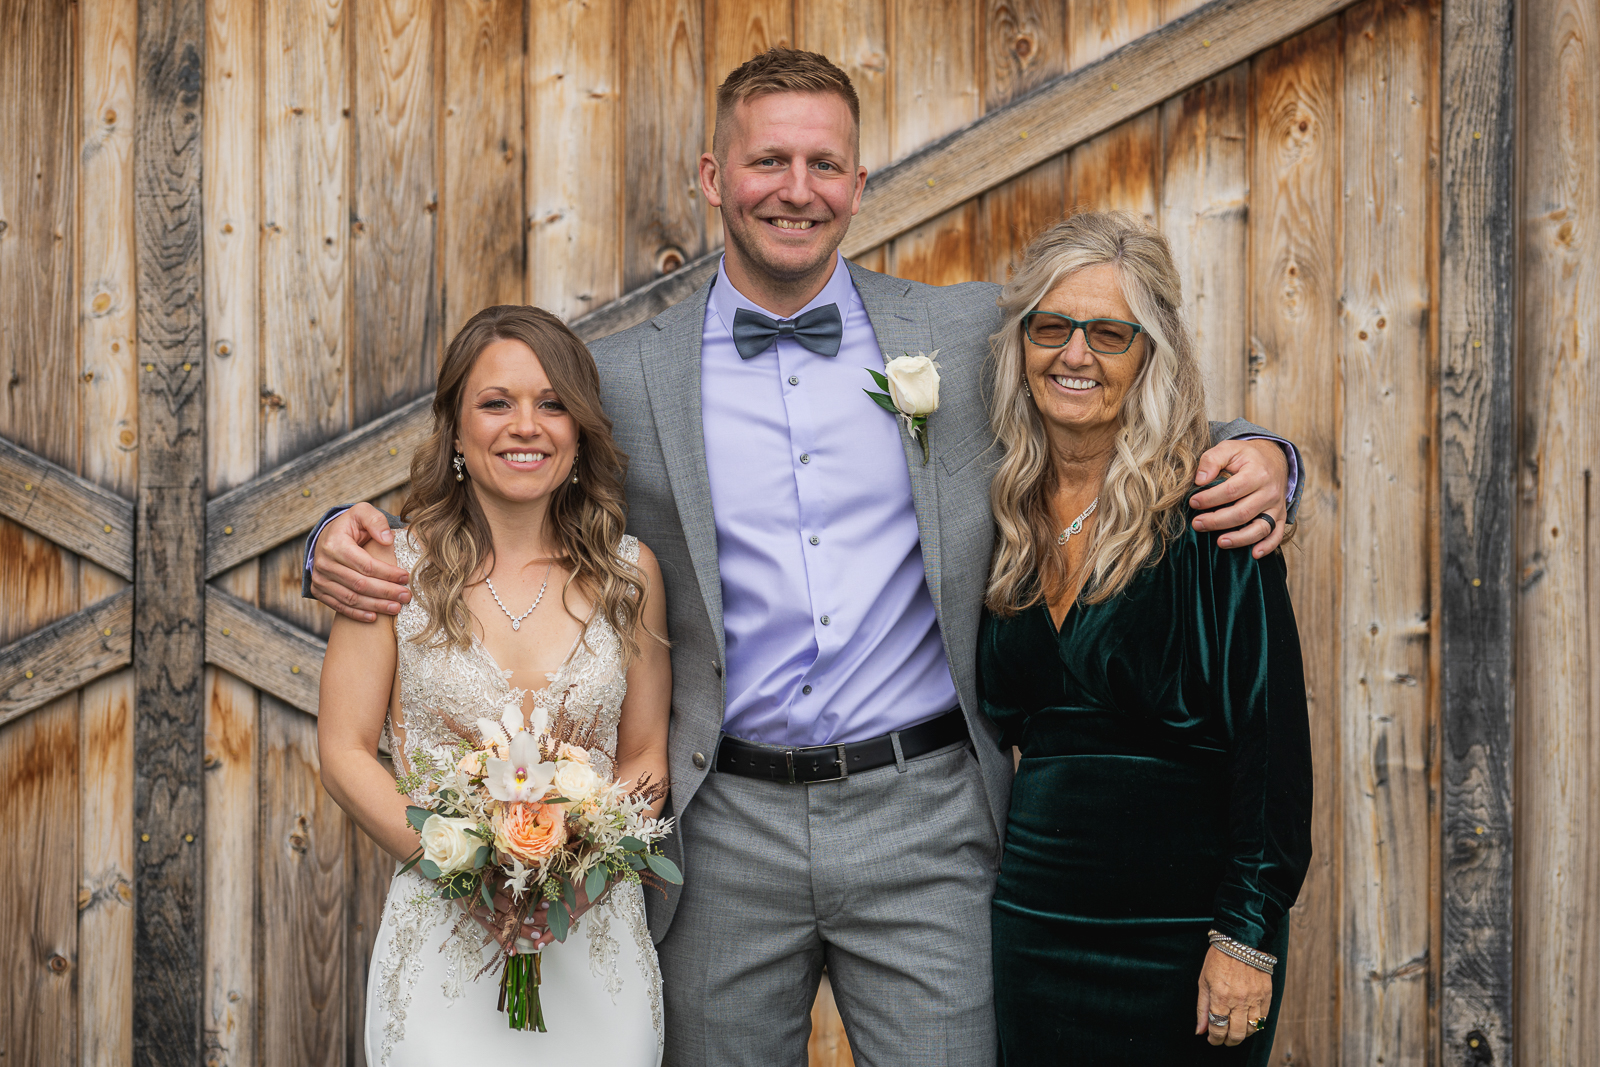 Bride and groom with groom's mom, family portrait, wedding photo, fall wedding, rustic outdoor wedding ceremony at White Birch Barn